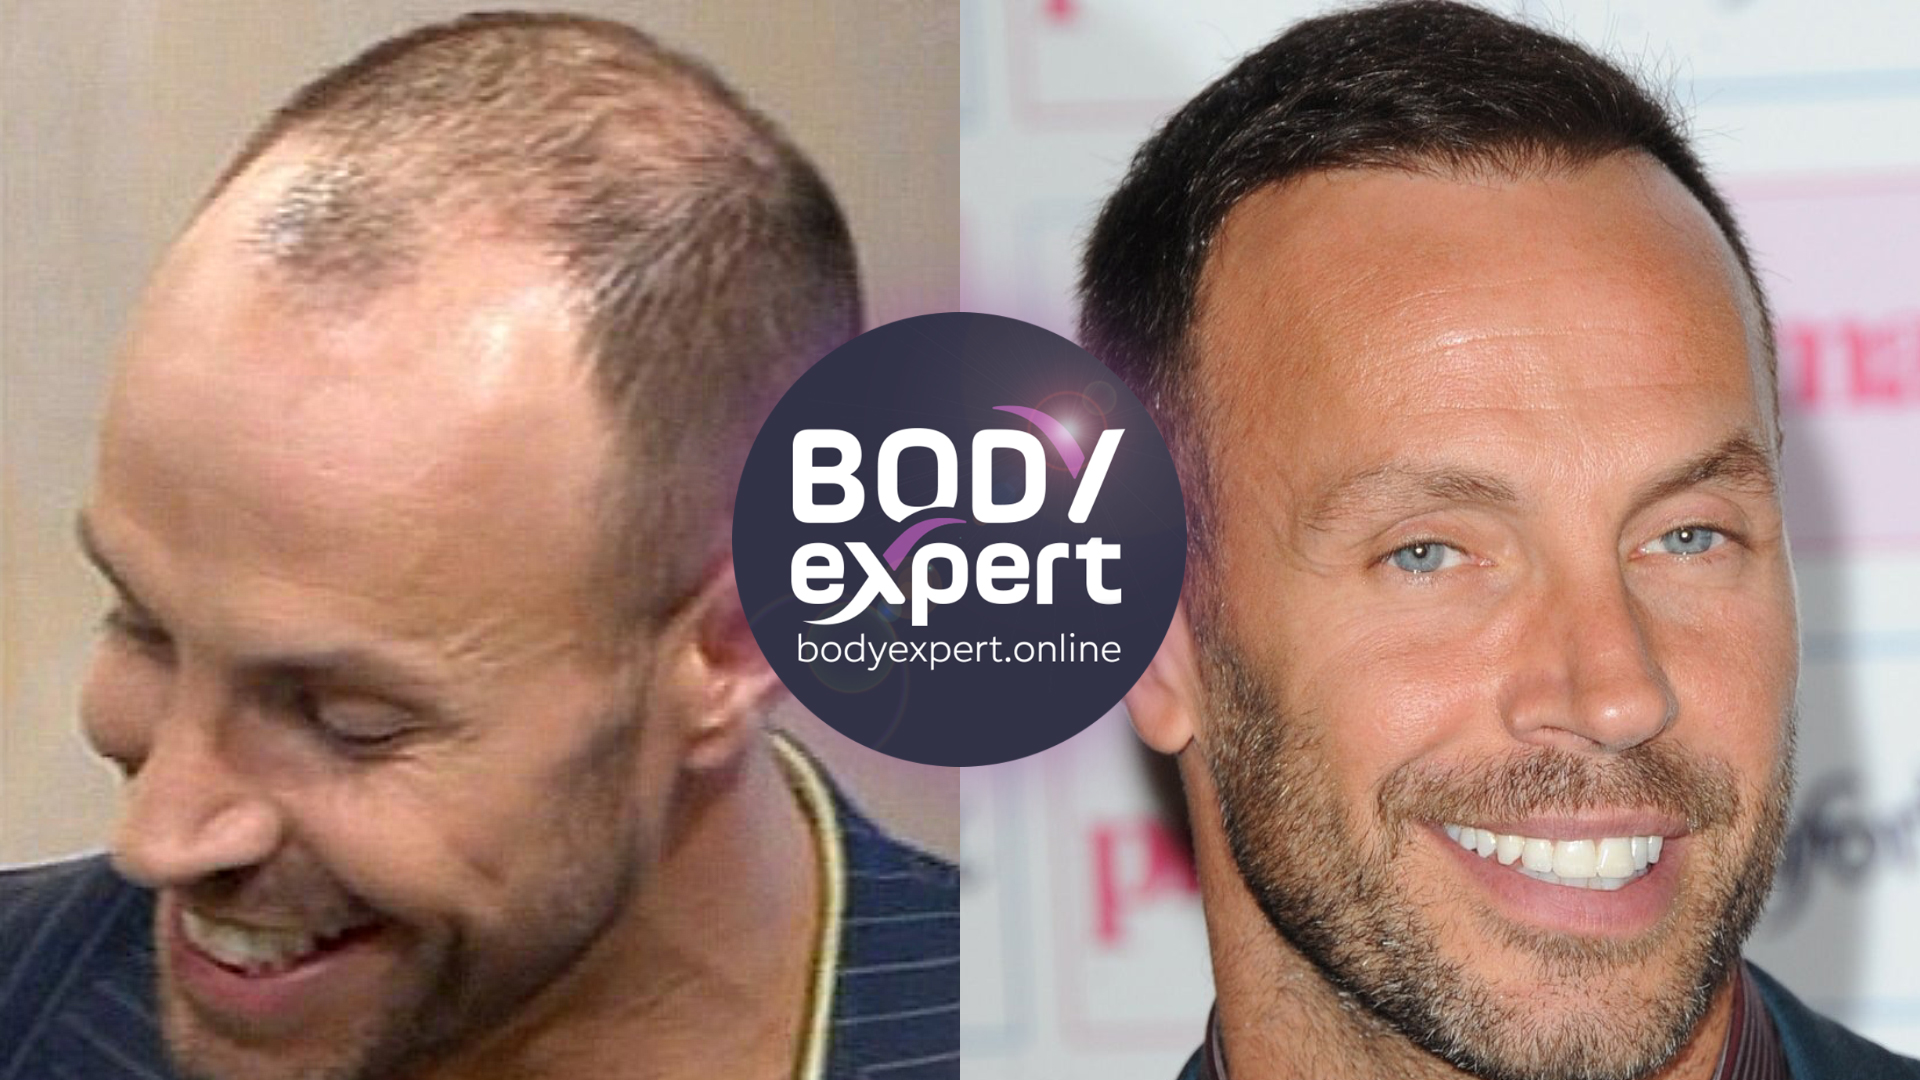 Hair transplant: which celebrity has a hair transplant?